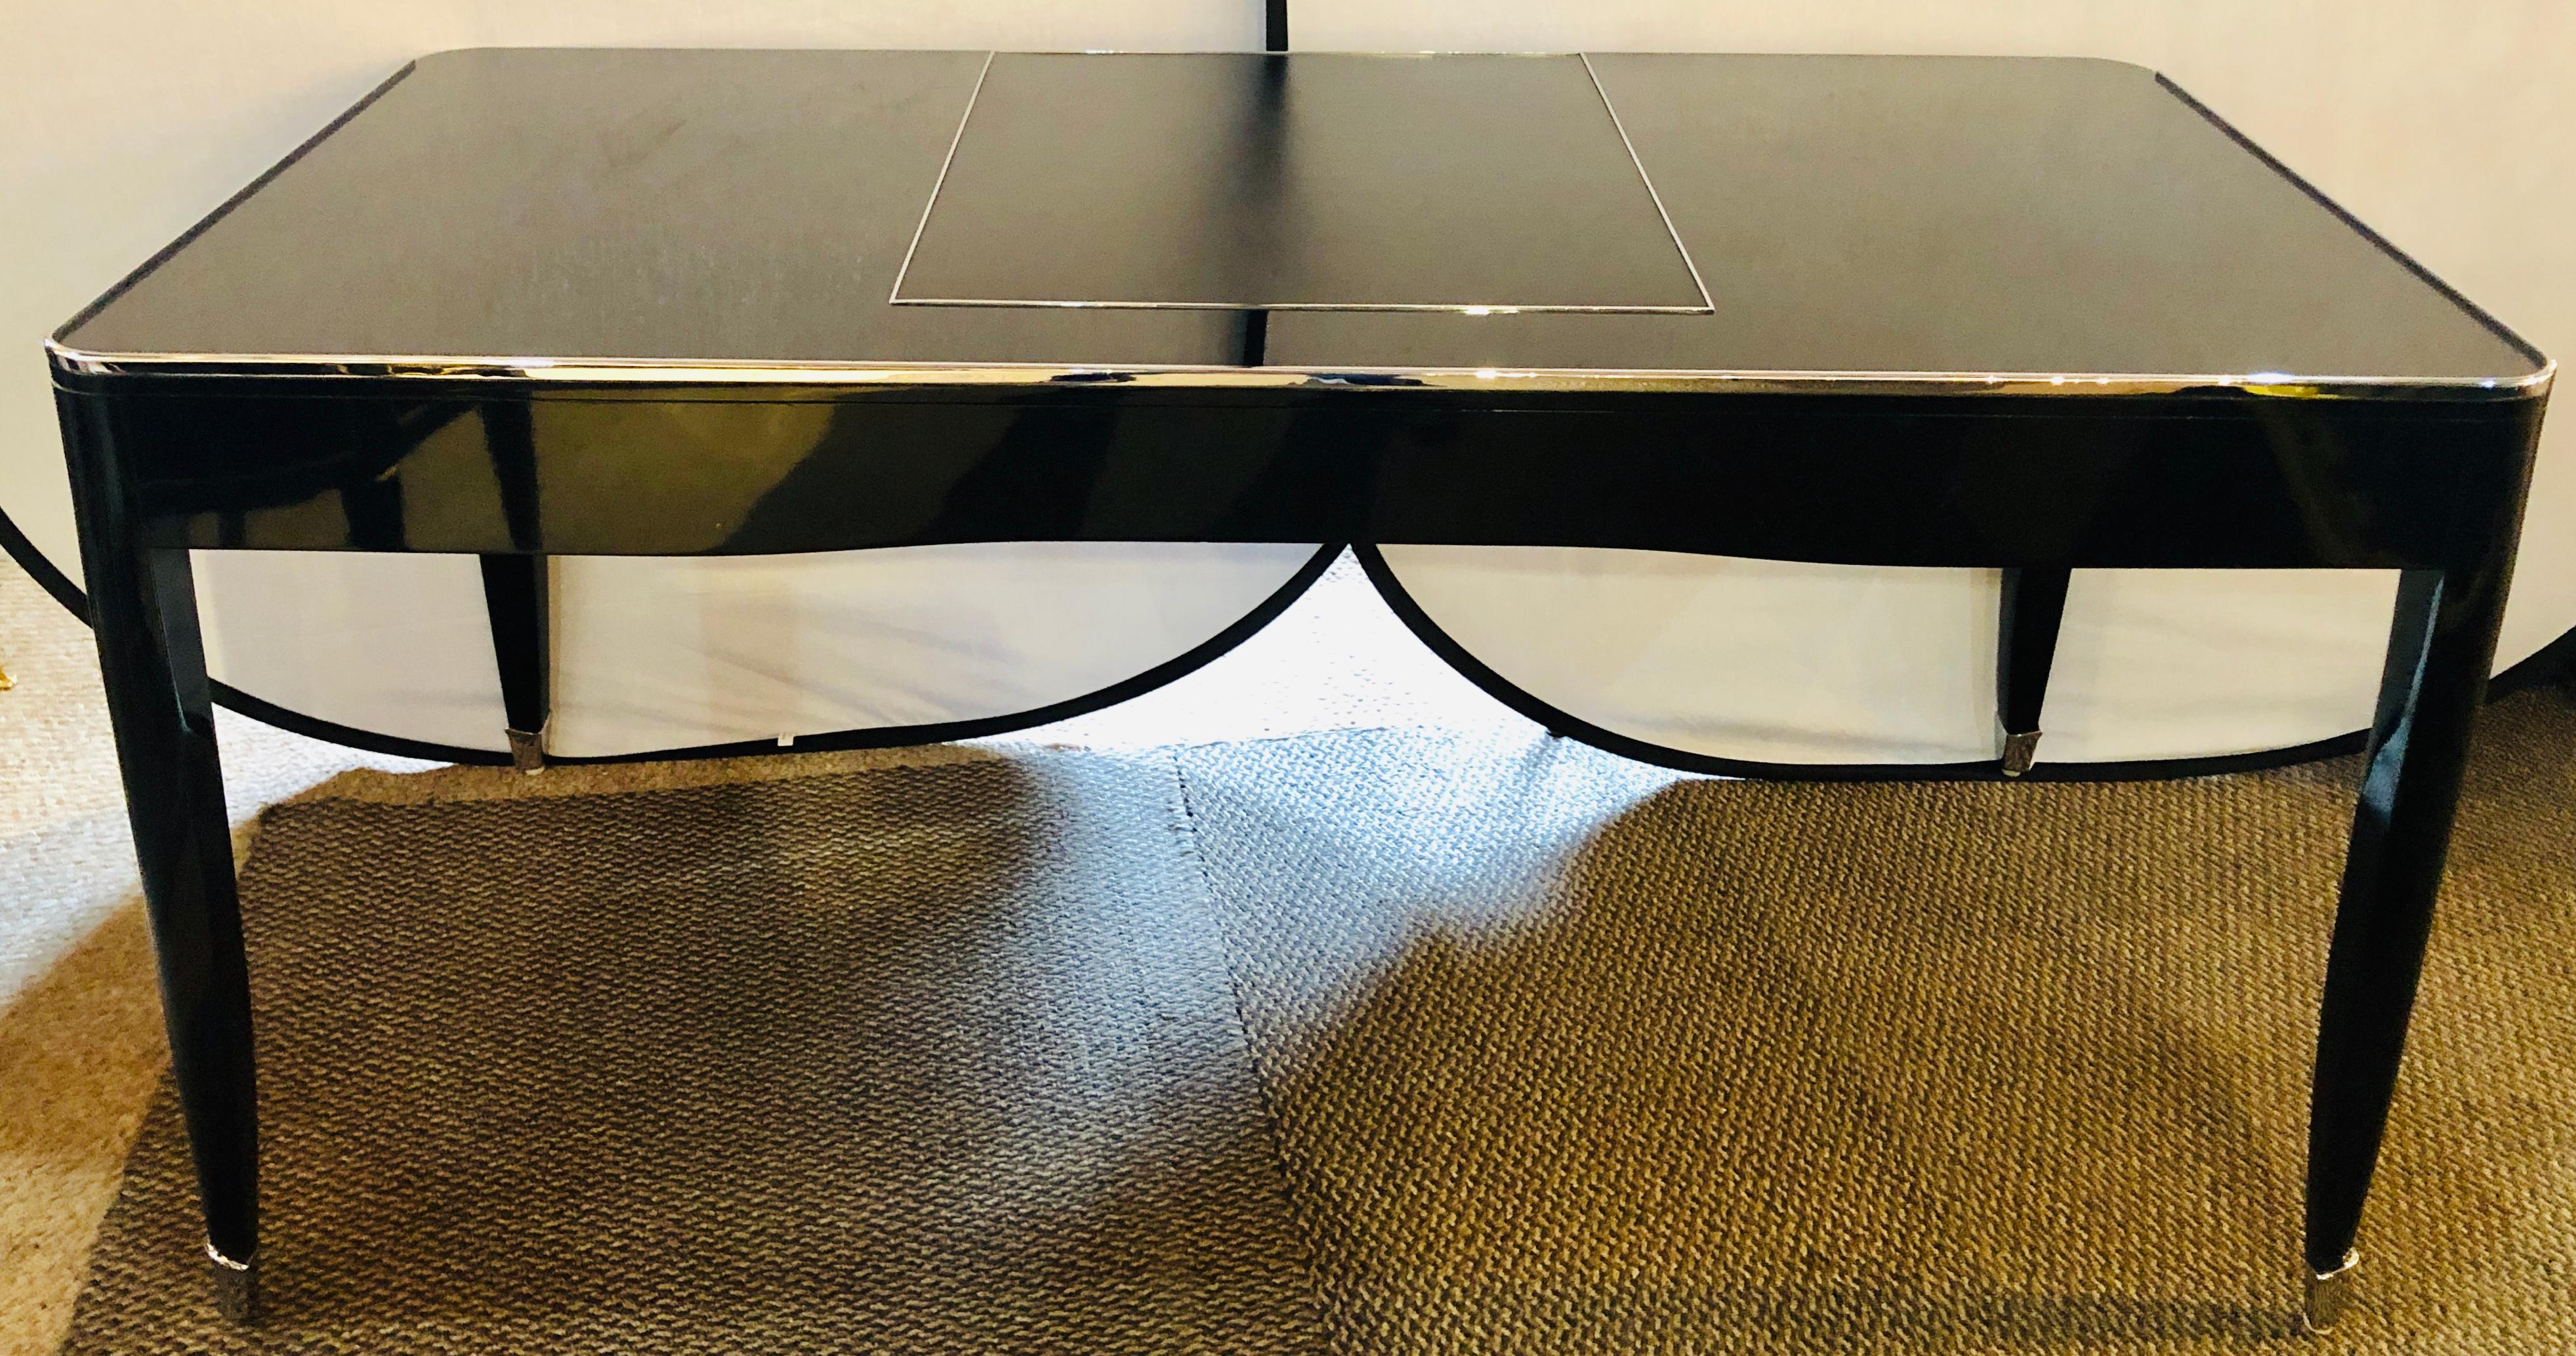 One fifth Paris desk by Ralph Lauren-black lacquered with chrome accents. Stamped Ralph Lauren an ebony and chrome top desk. Brand new! Retails at $14,000 with a long waiting time for production.